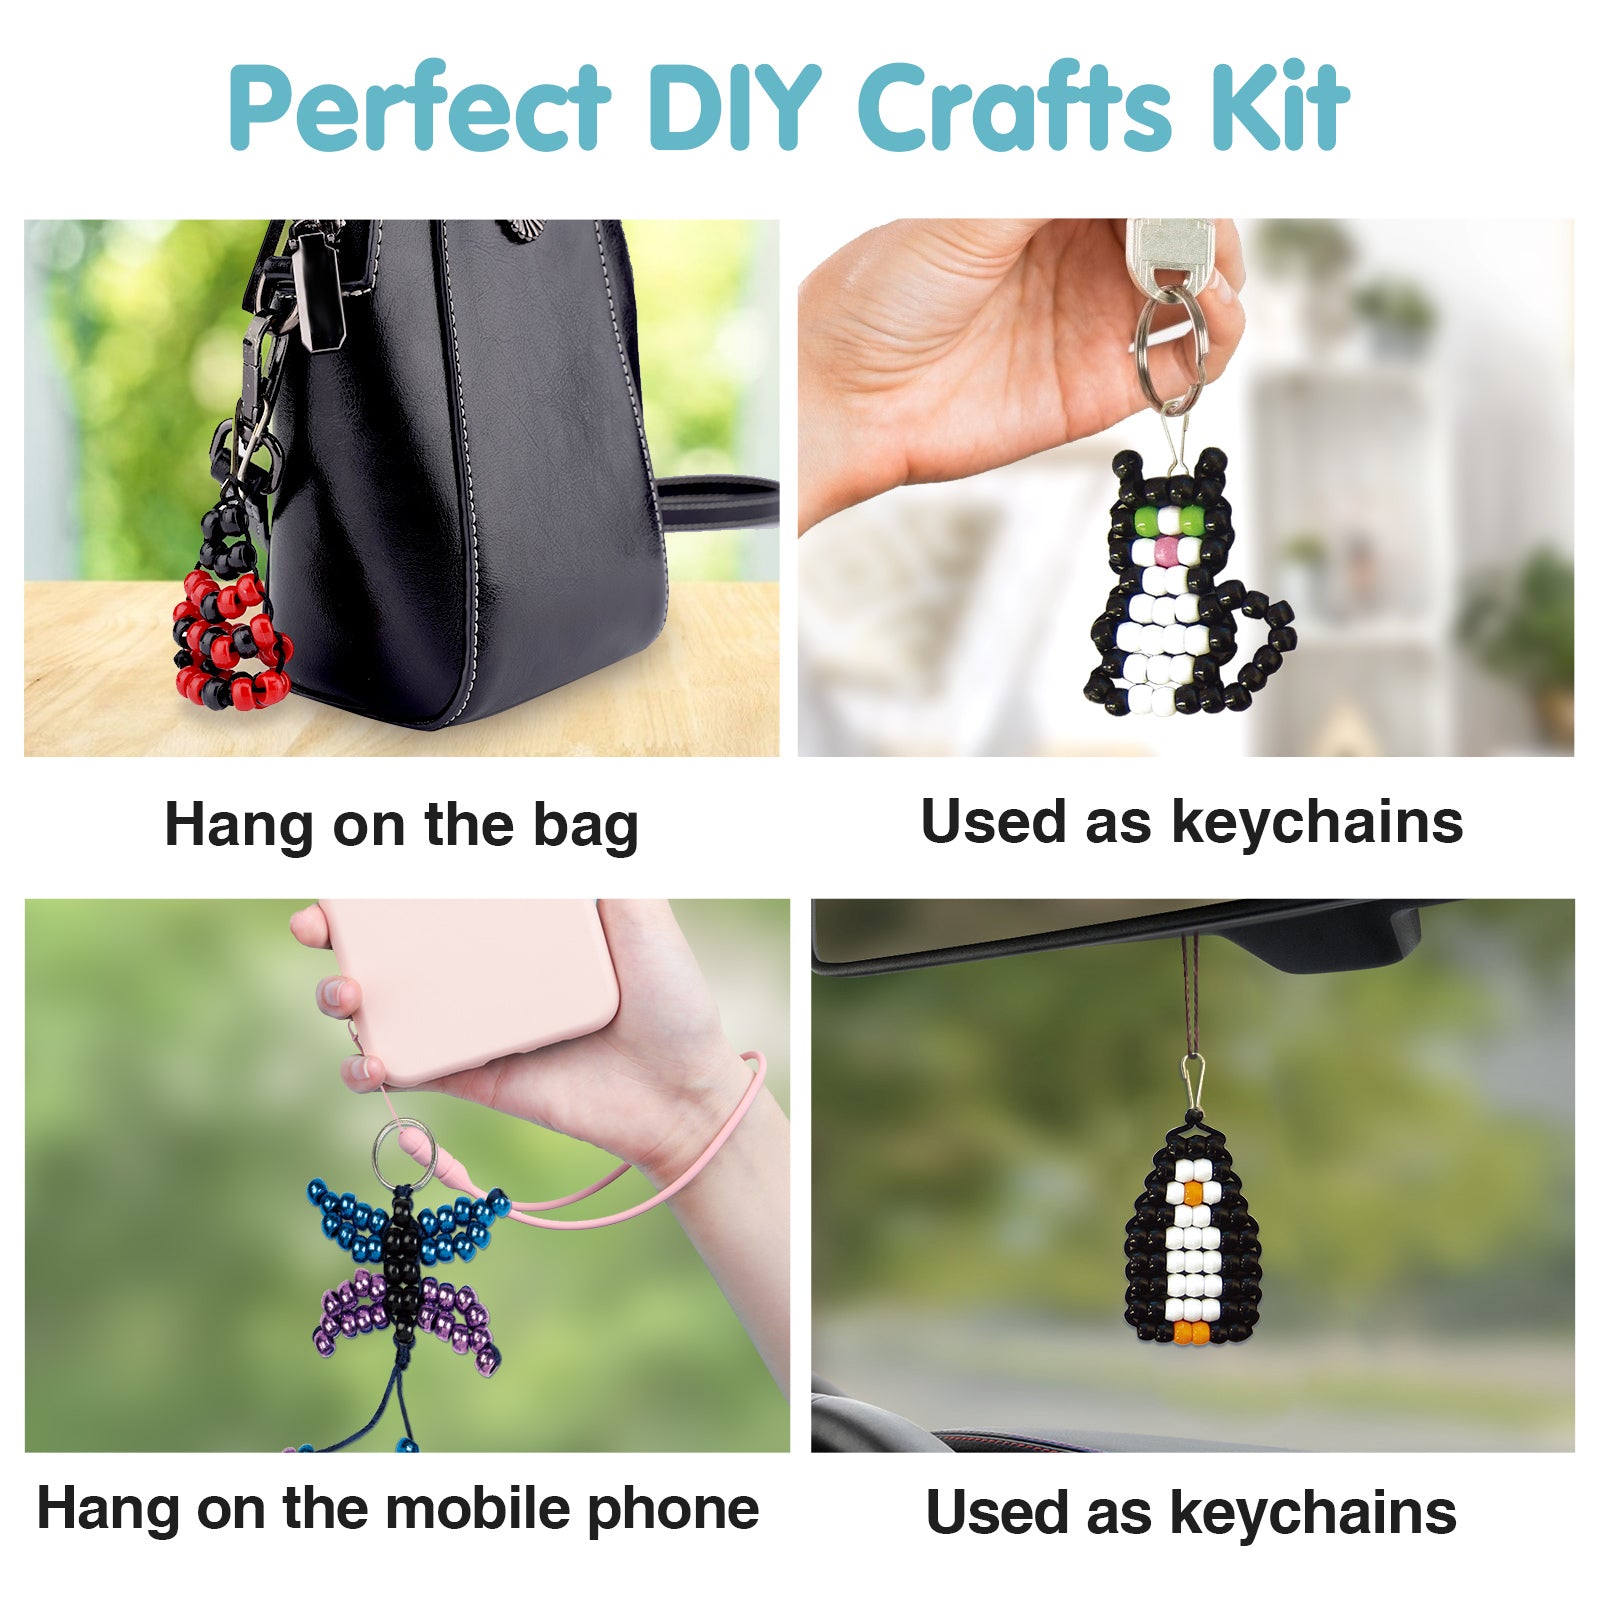 TBC The Best Crafts 641 Pcs Bead Pets Crafts for Kids Pony Beads Pet Keychain Craft Kit DIY Keychain Kit Create Your Own Backpack Hook Keyring